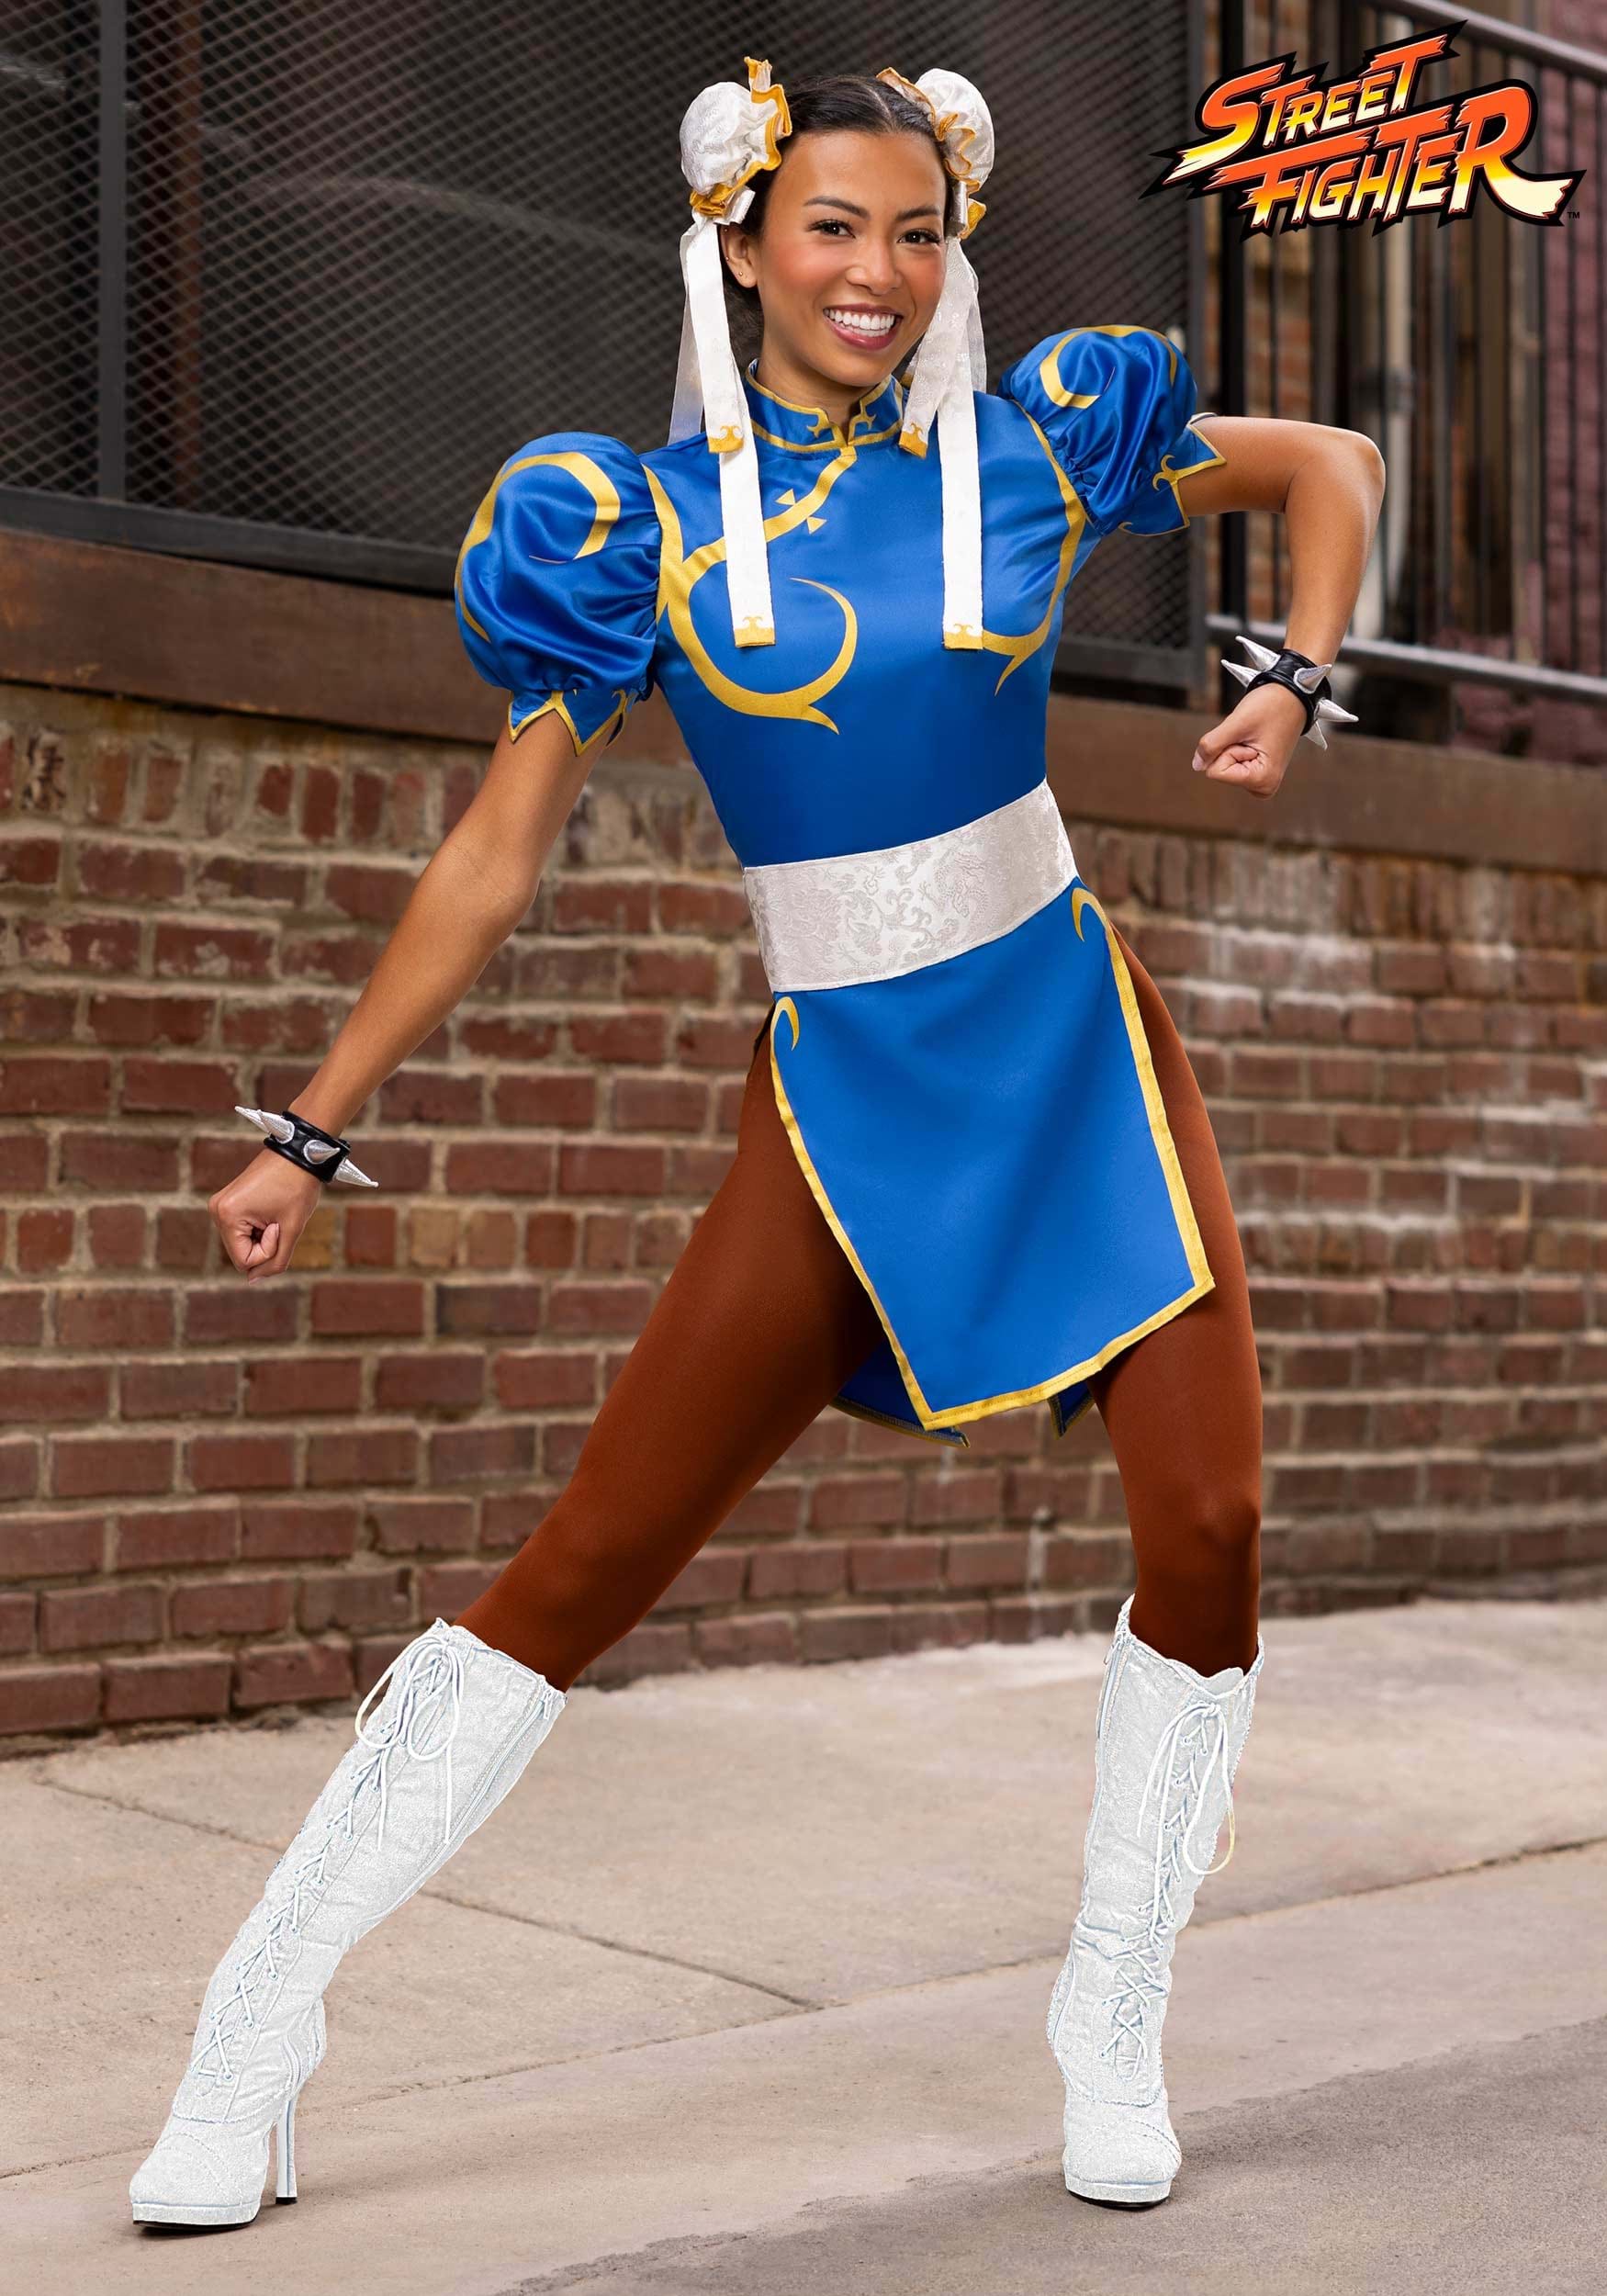 Street Fighter - Last chance to get this masked costume for